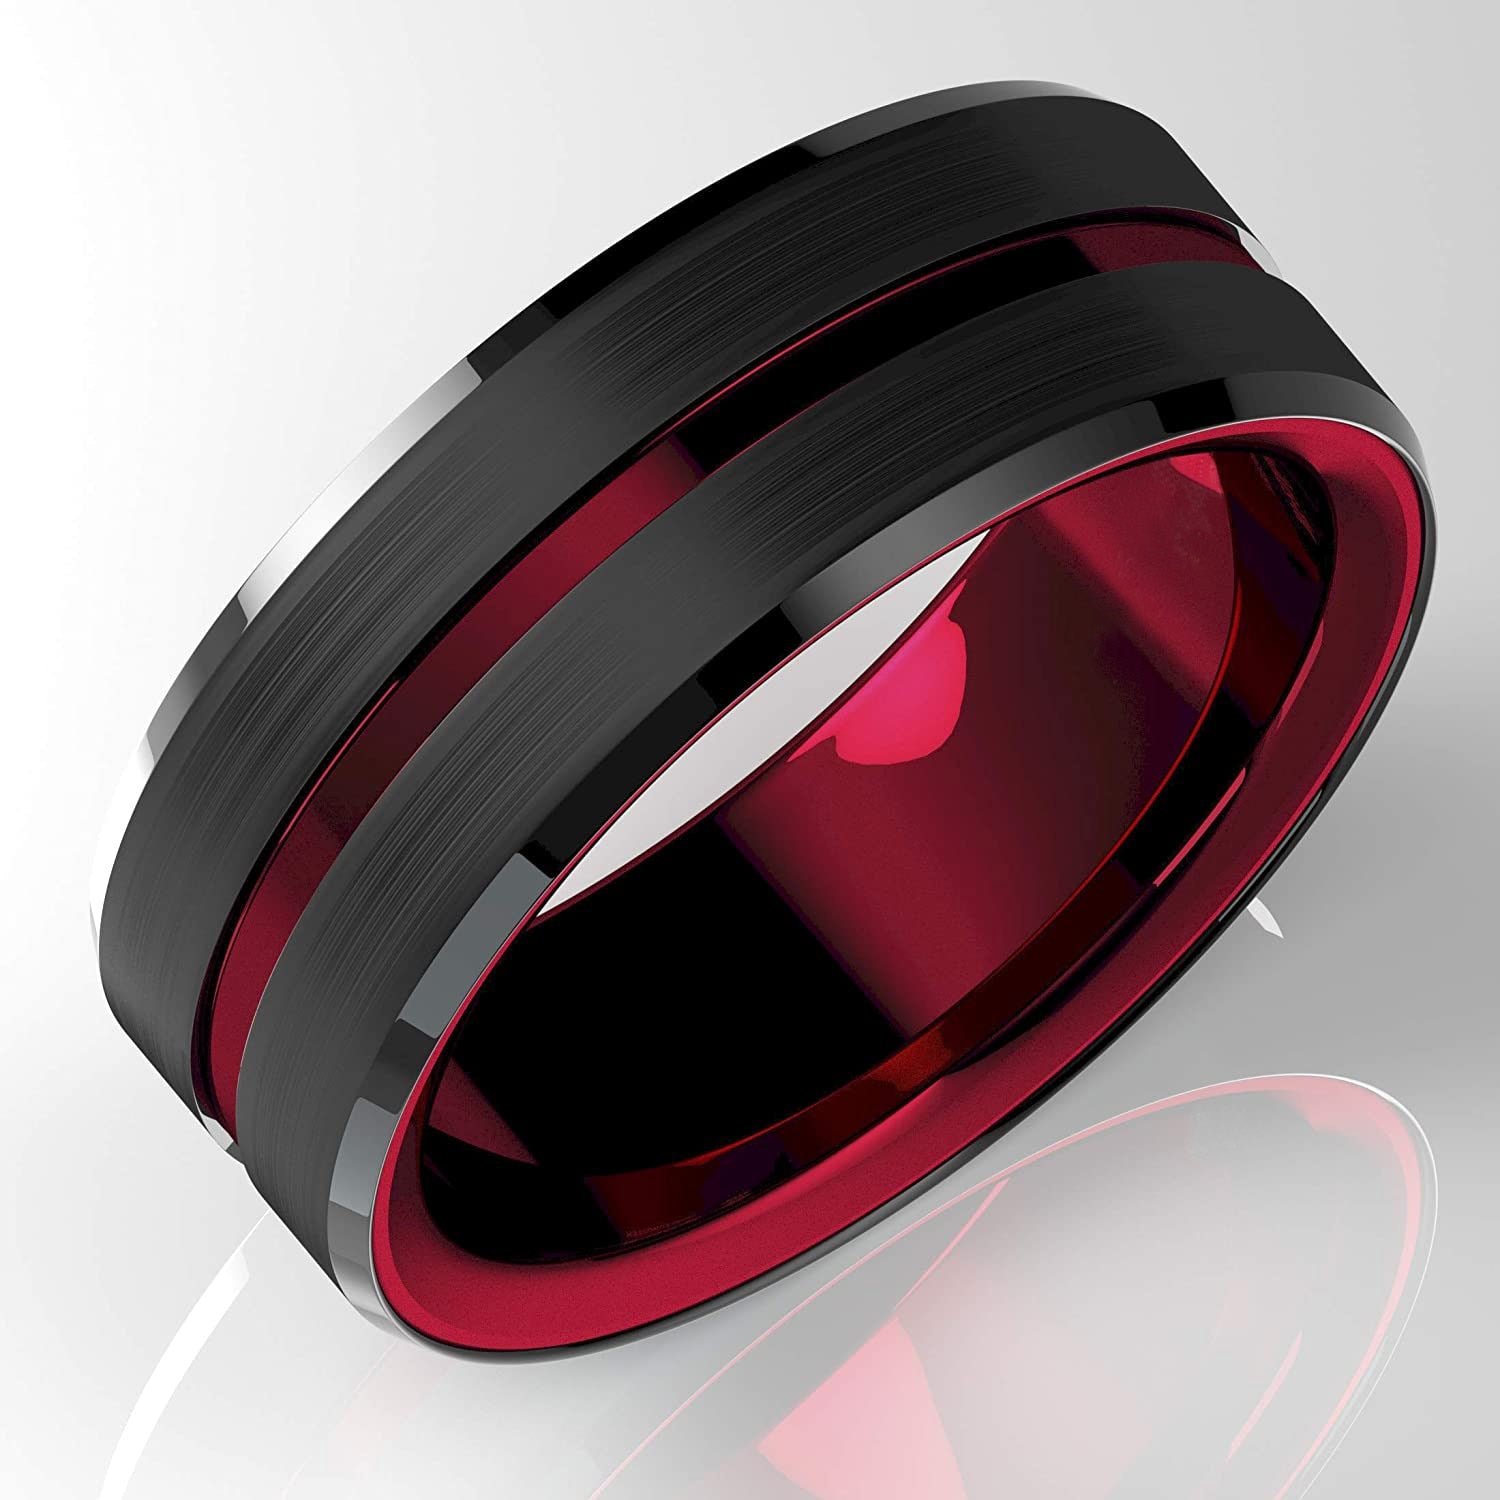 Black Tungsten  Red Groove Black Brushed Ladder Edge Engagement Ring